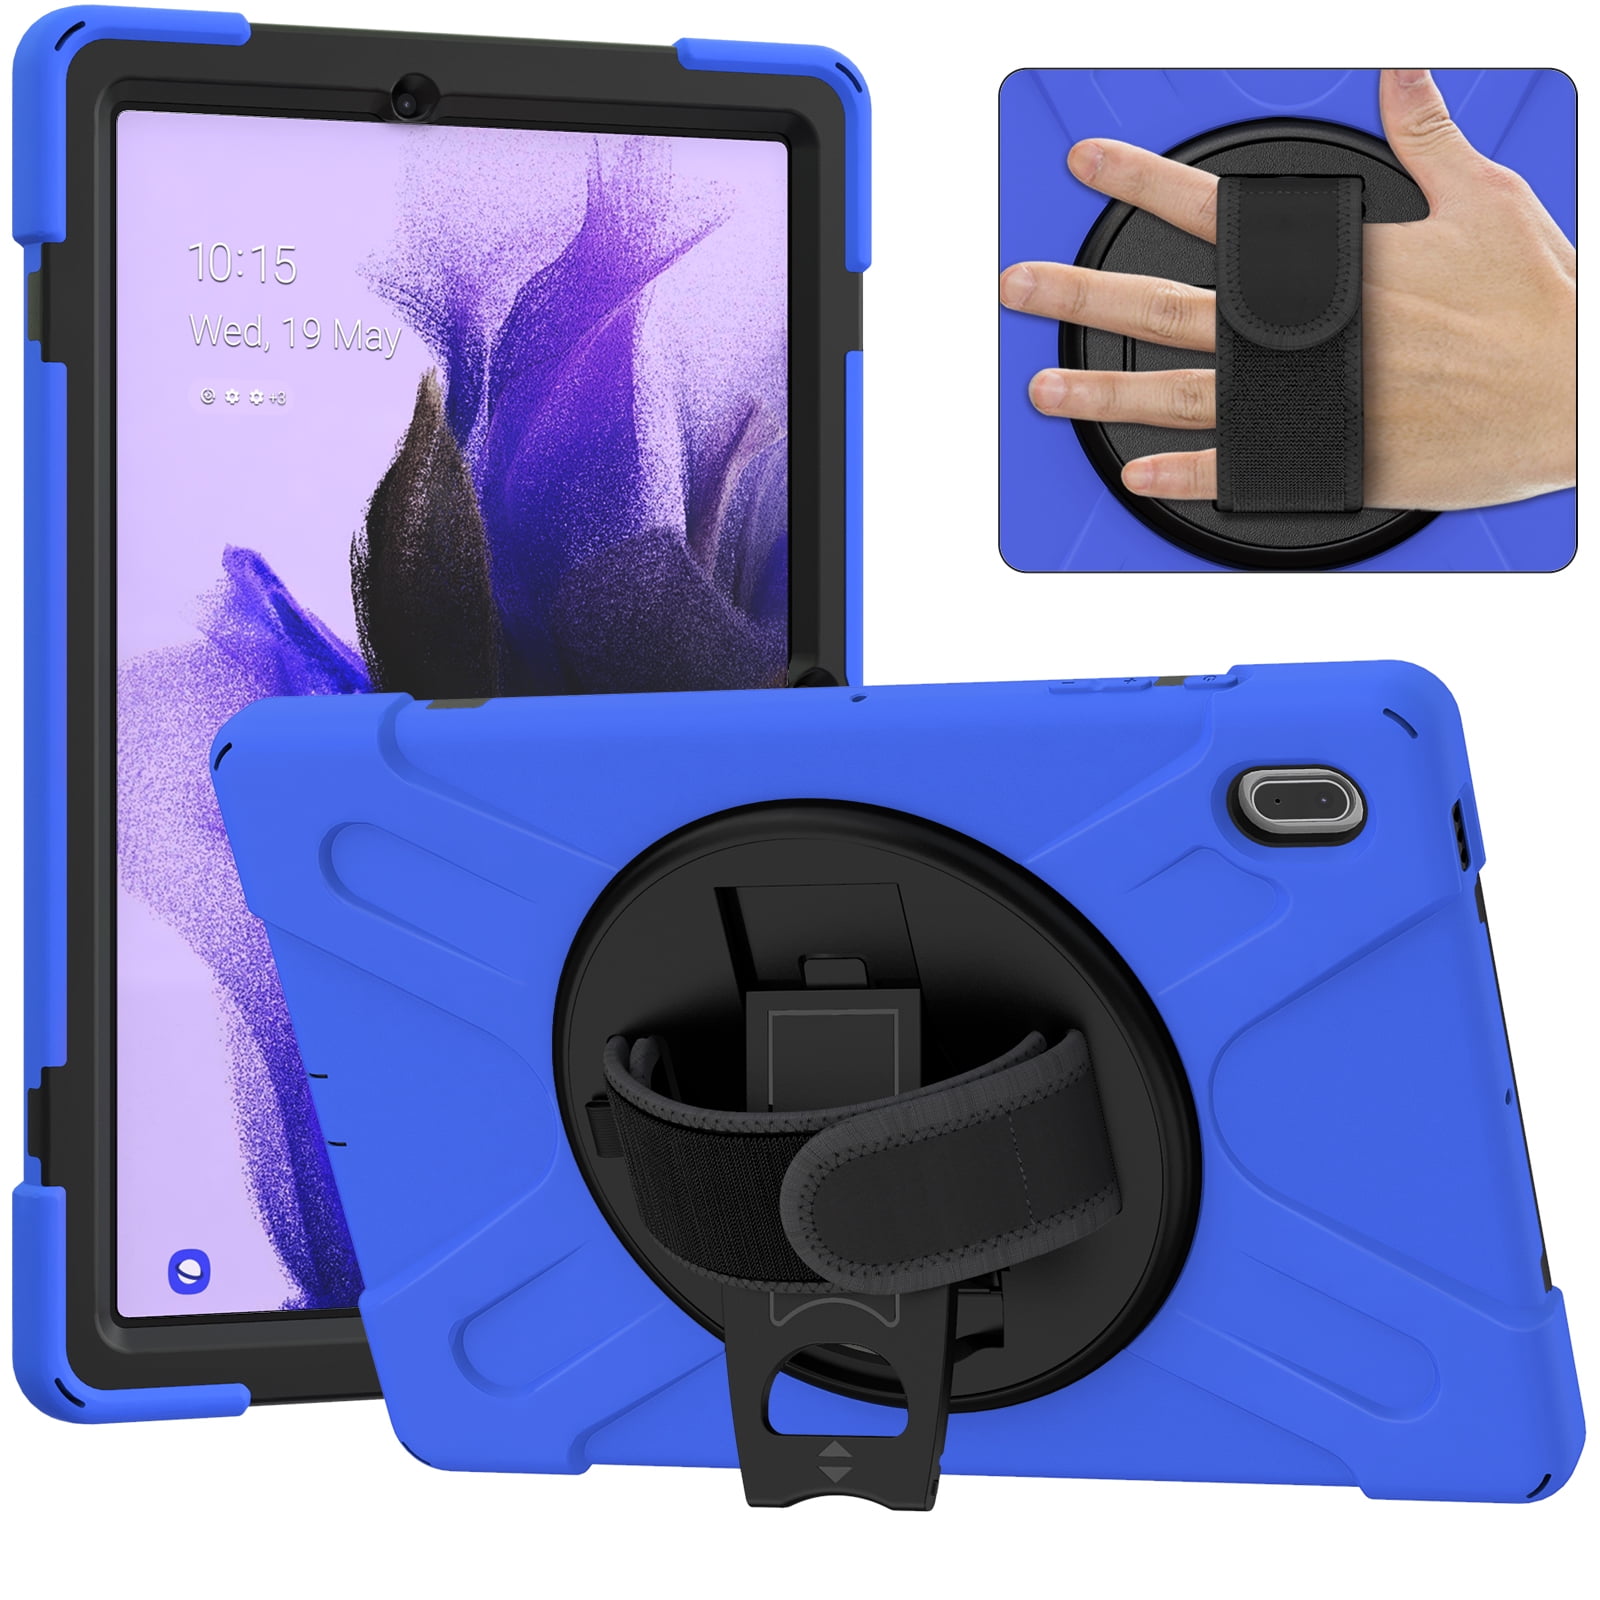 TOP SHE Case for Samsung Galaxy Tab S7 FE 5G (12.4